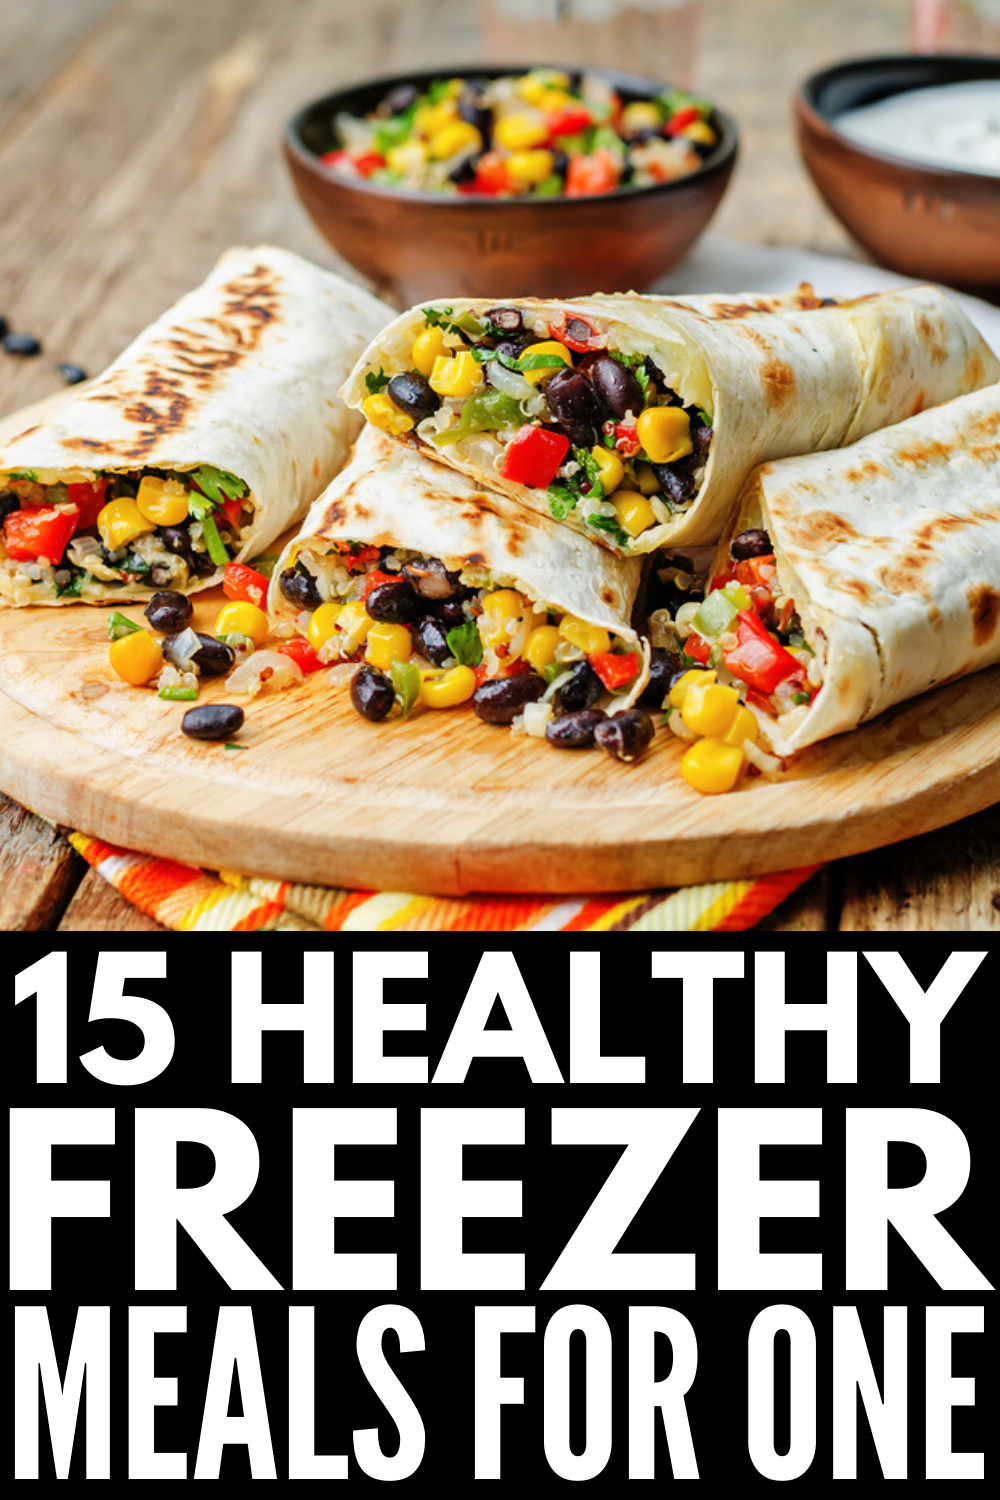 90 Cheap and Healthy Freezer Meal Recipes That Save Time and Money -   19 meal prep recipes vegetarian freezer ideas